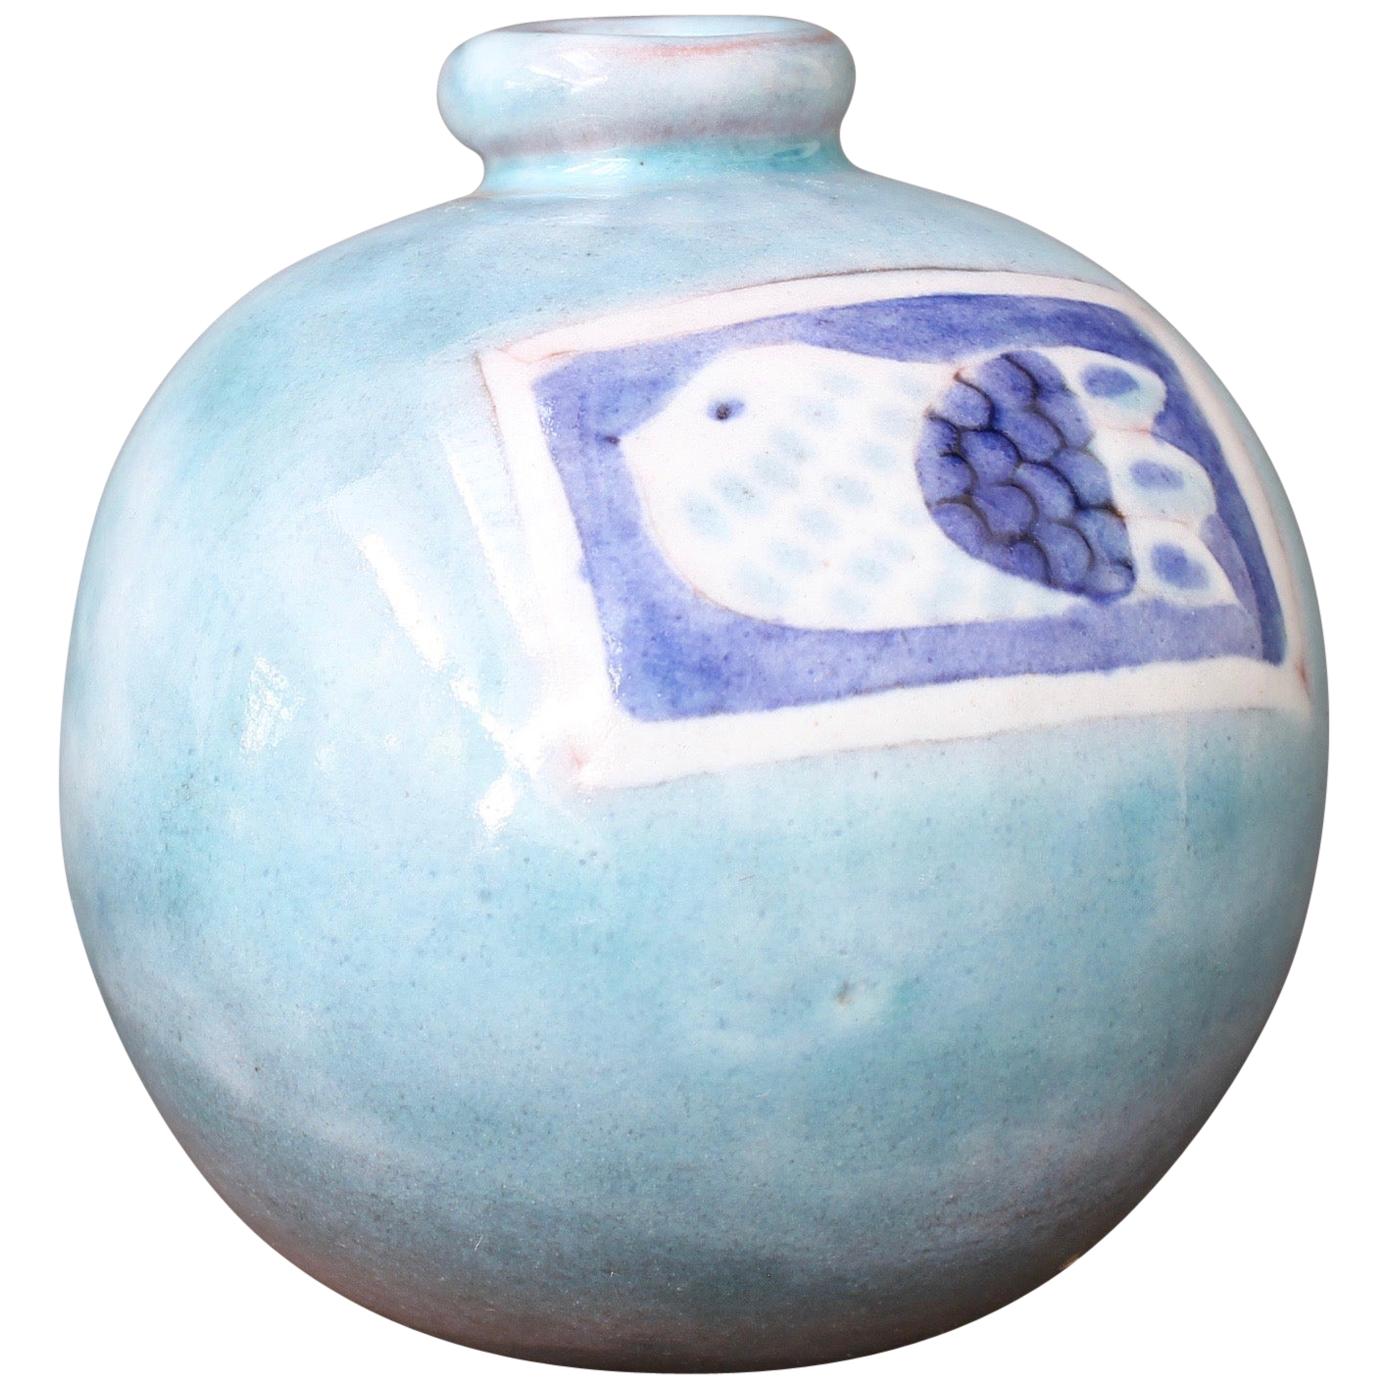 Decorative Ceramic Vase by Cloutier Brothers, circa 1970s